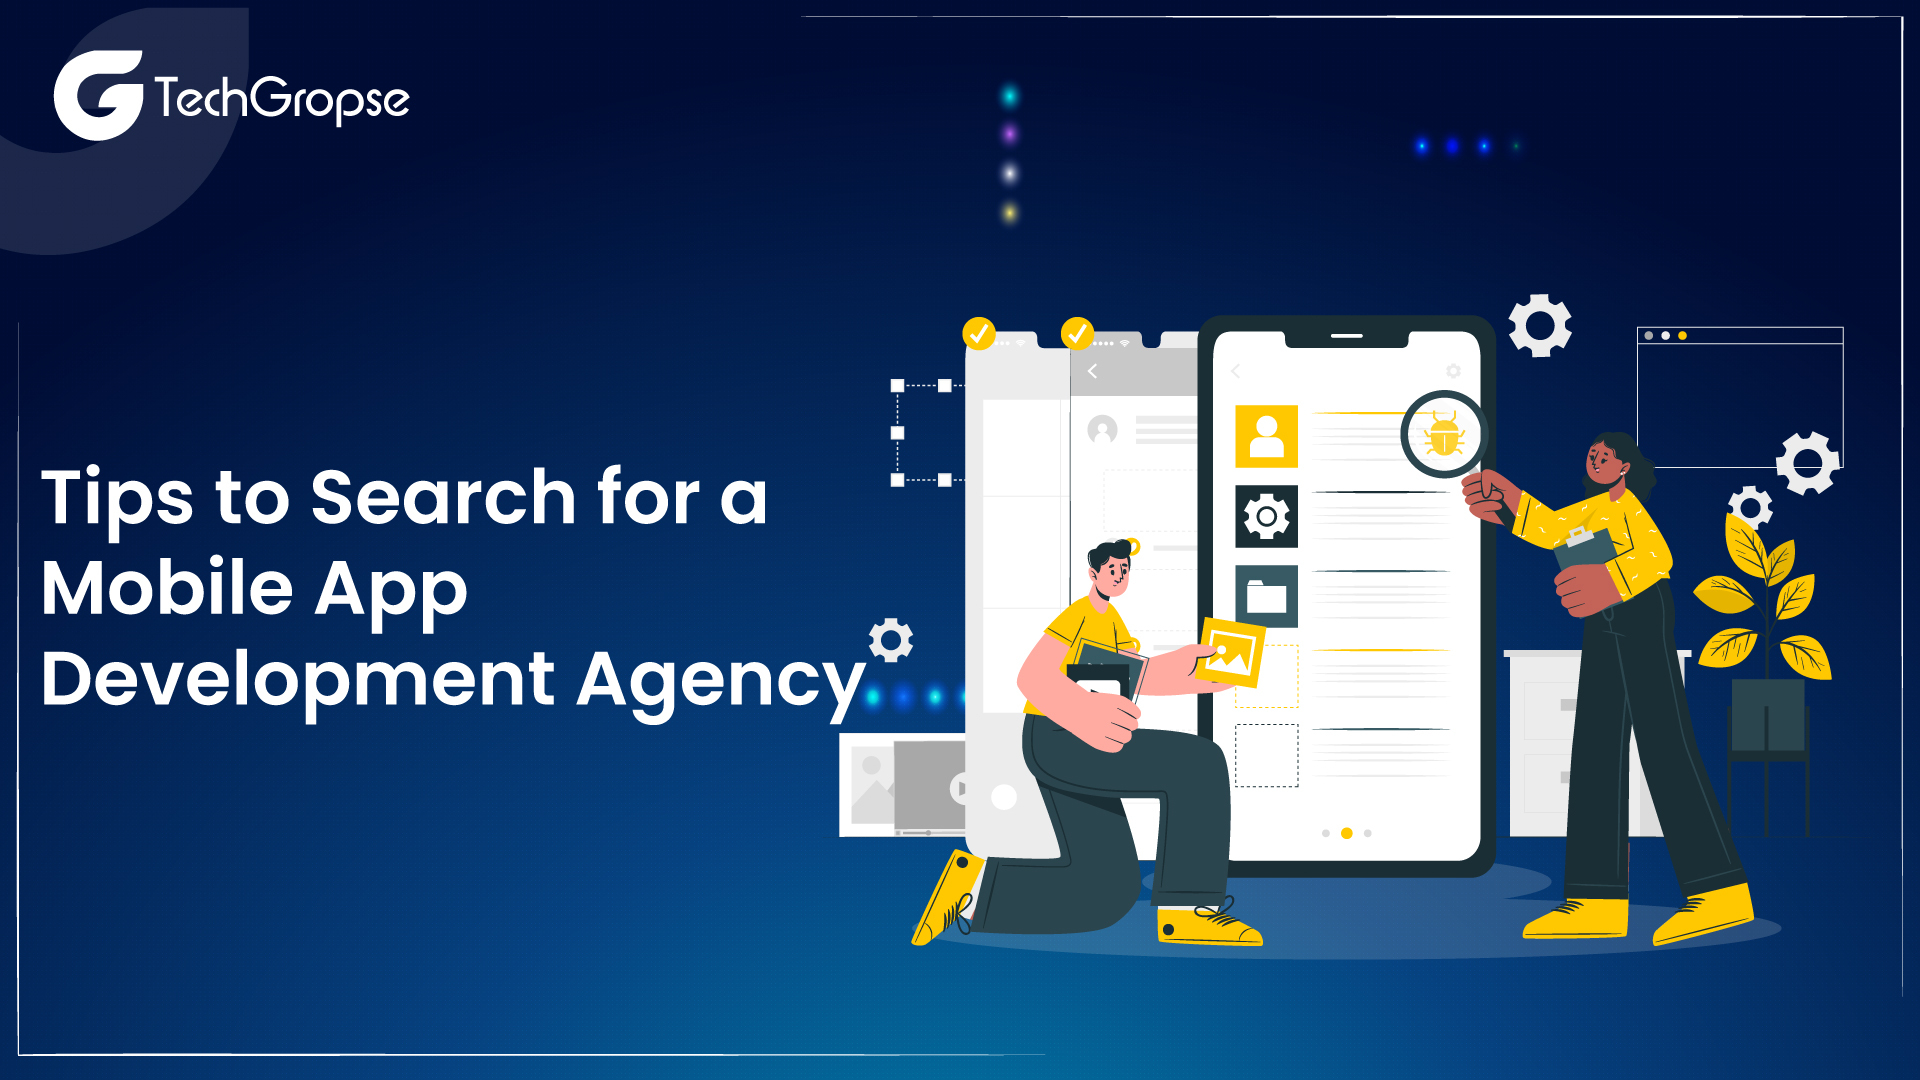 Tips to Search for a Mobile App Development Agency